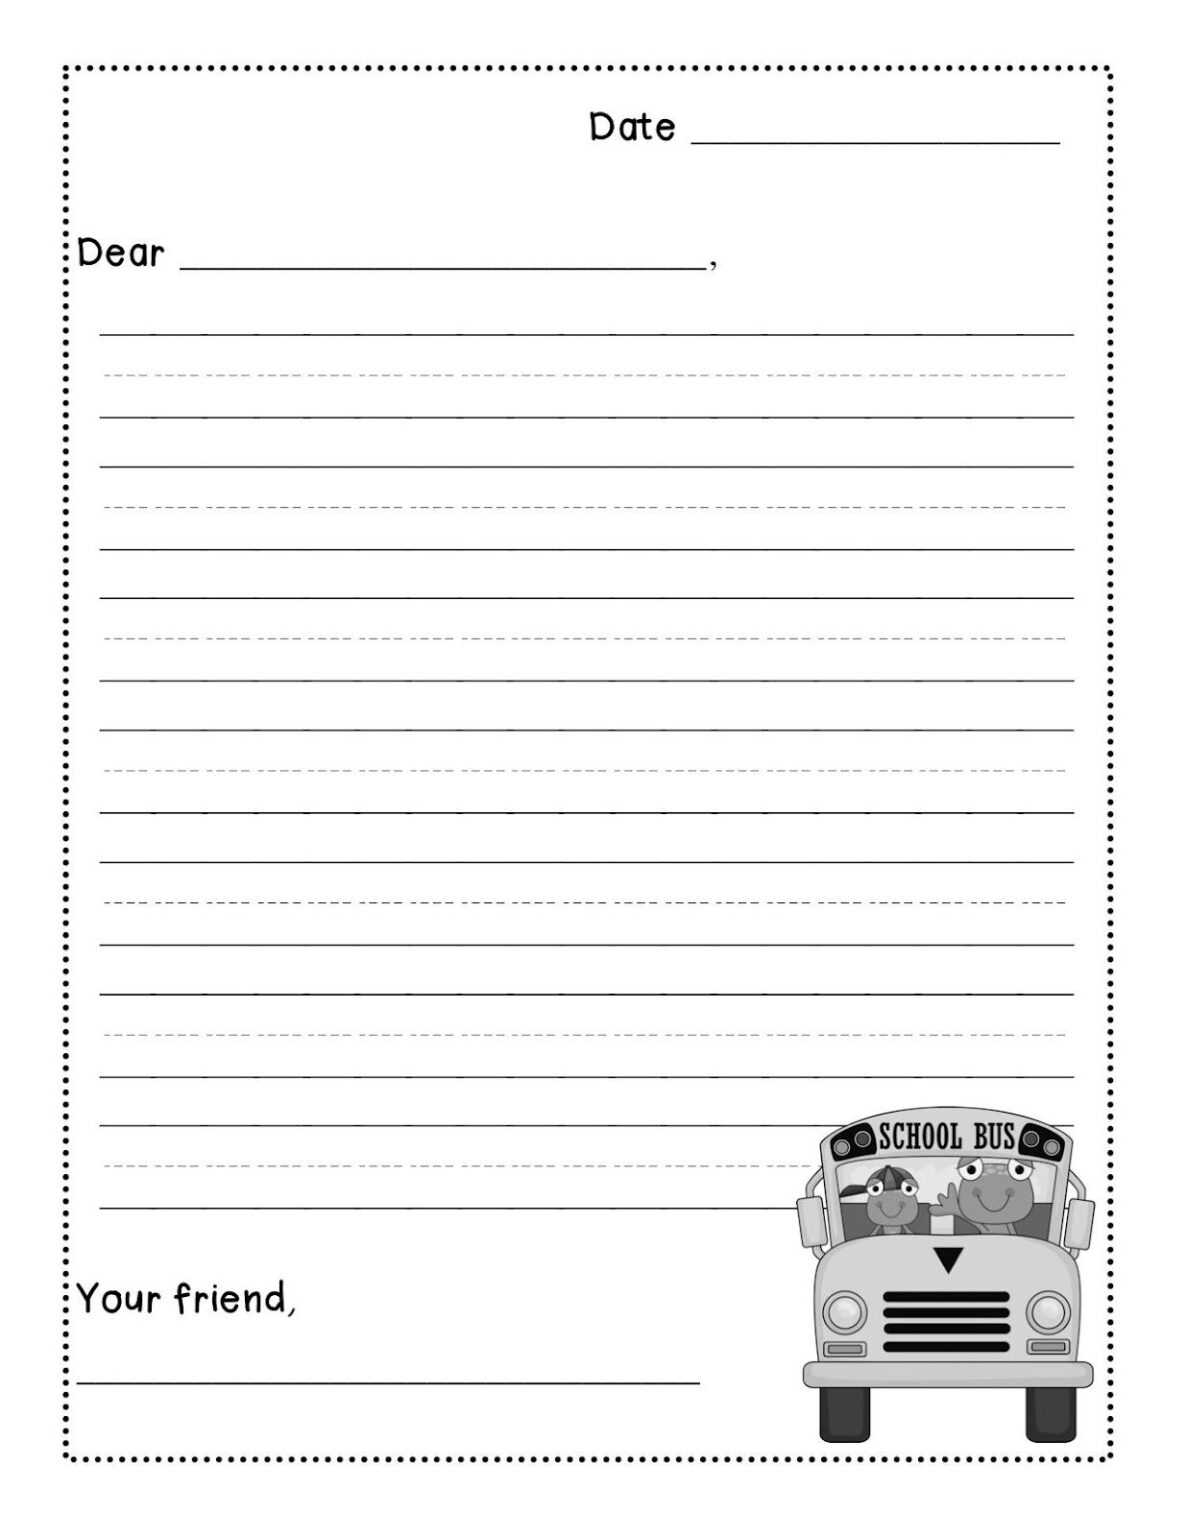 how-to-write-a-friendly-letter-worksheets-99worksheets